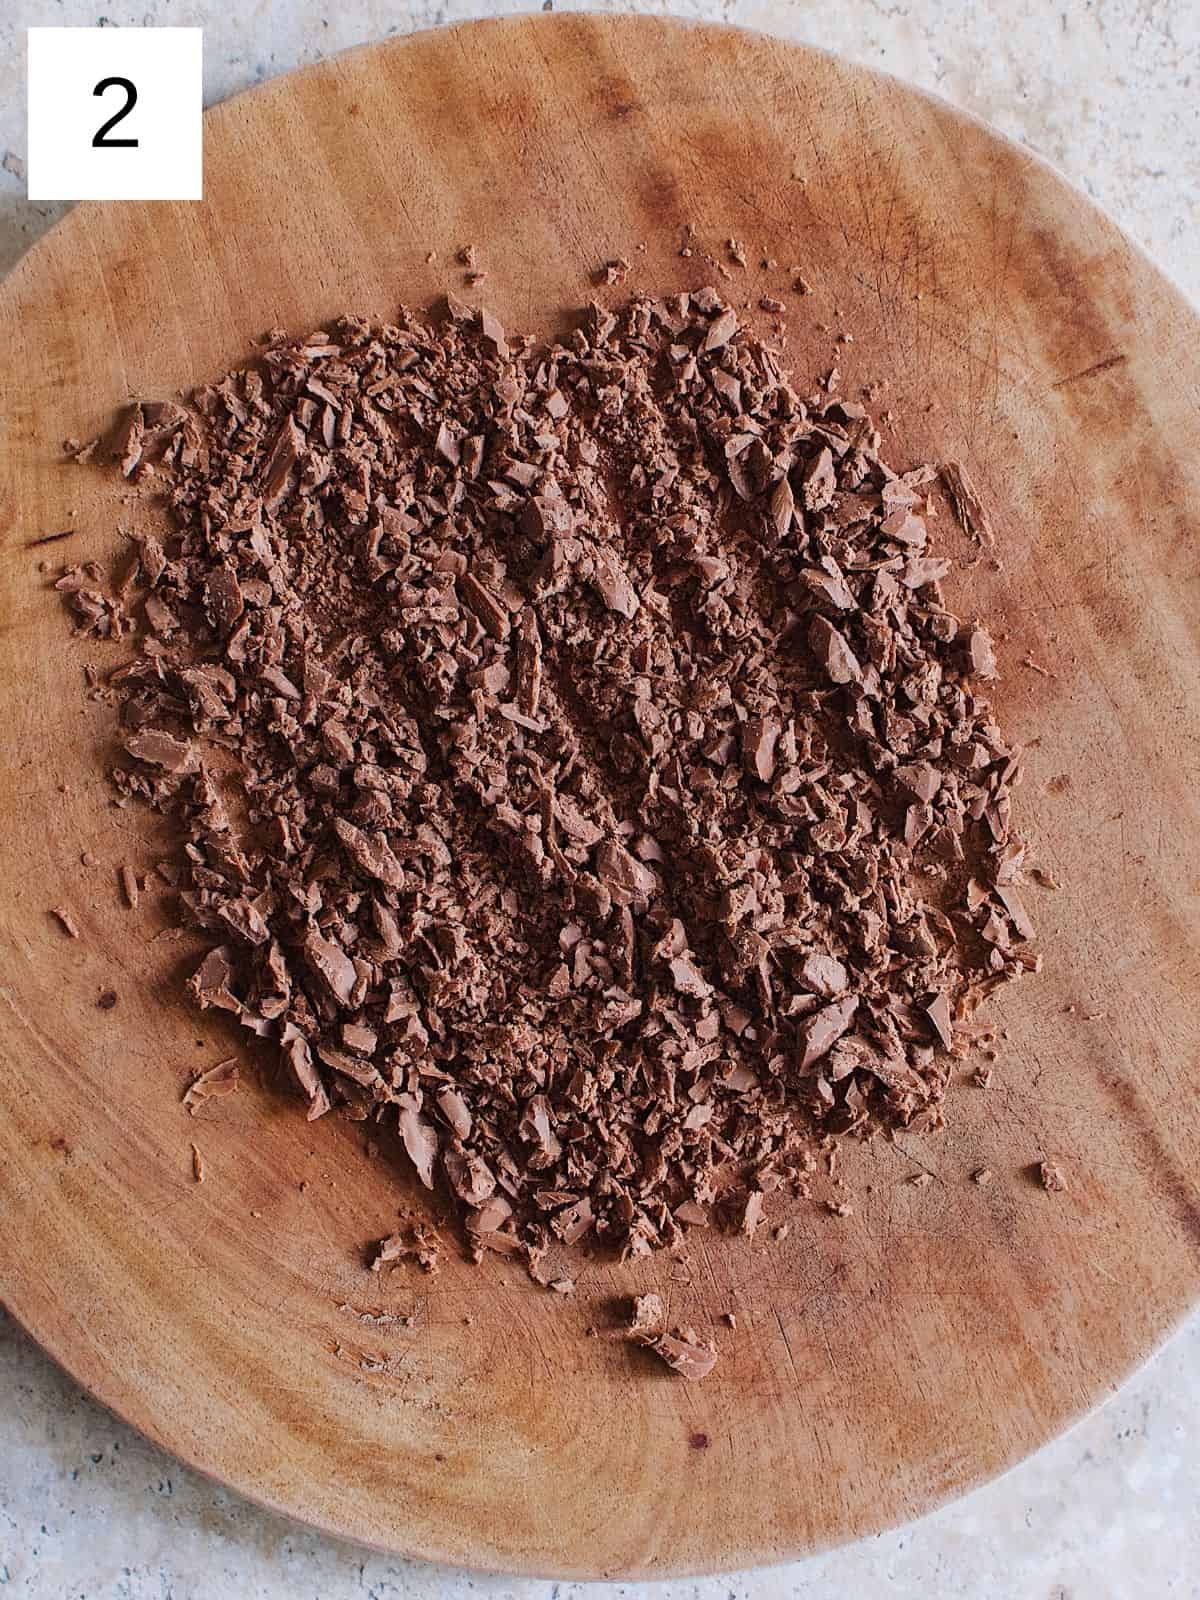 chopped chocolate on a wooden cutting board.